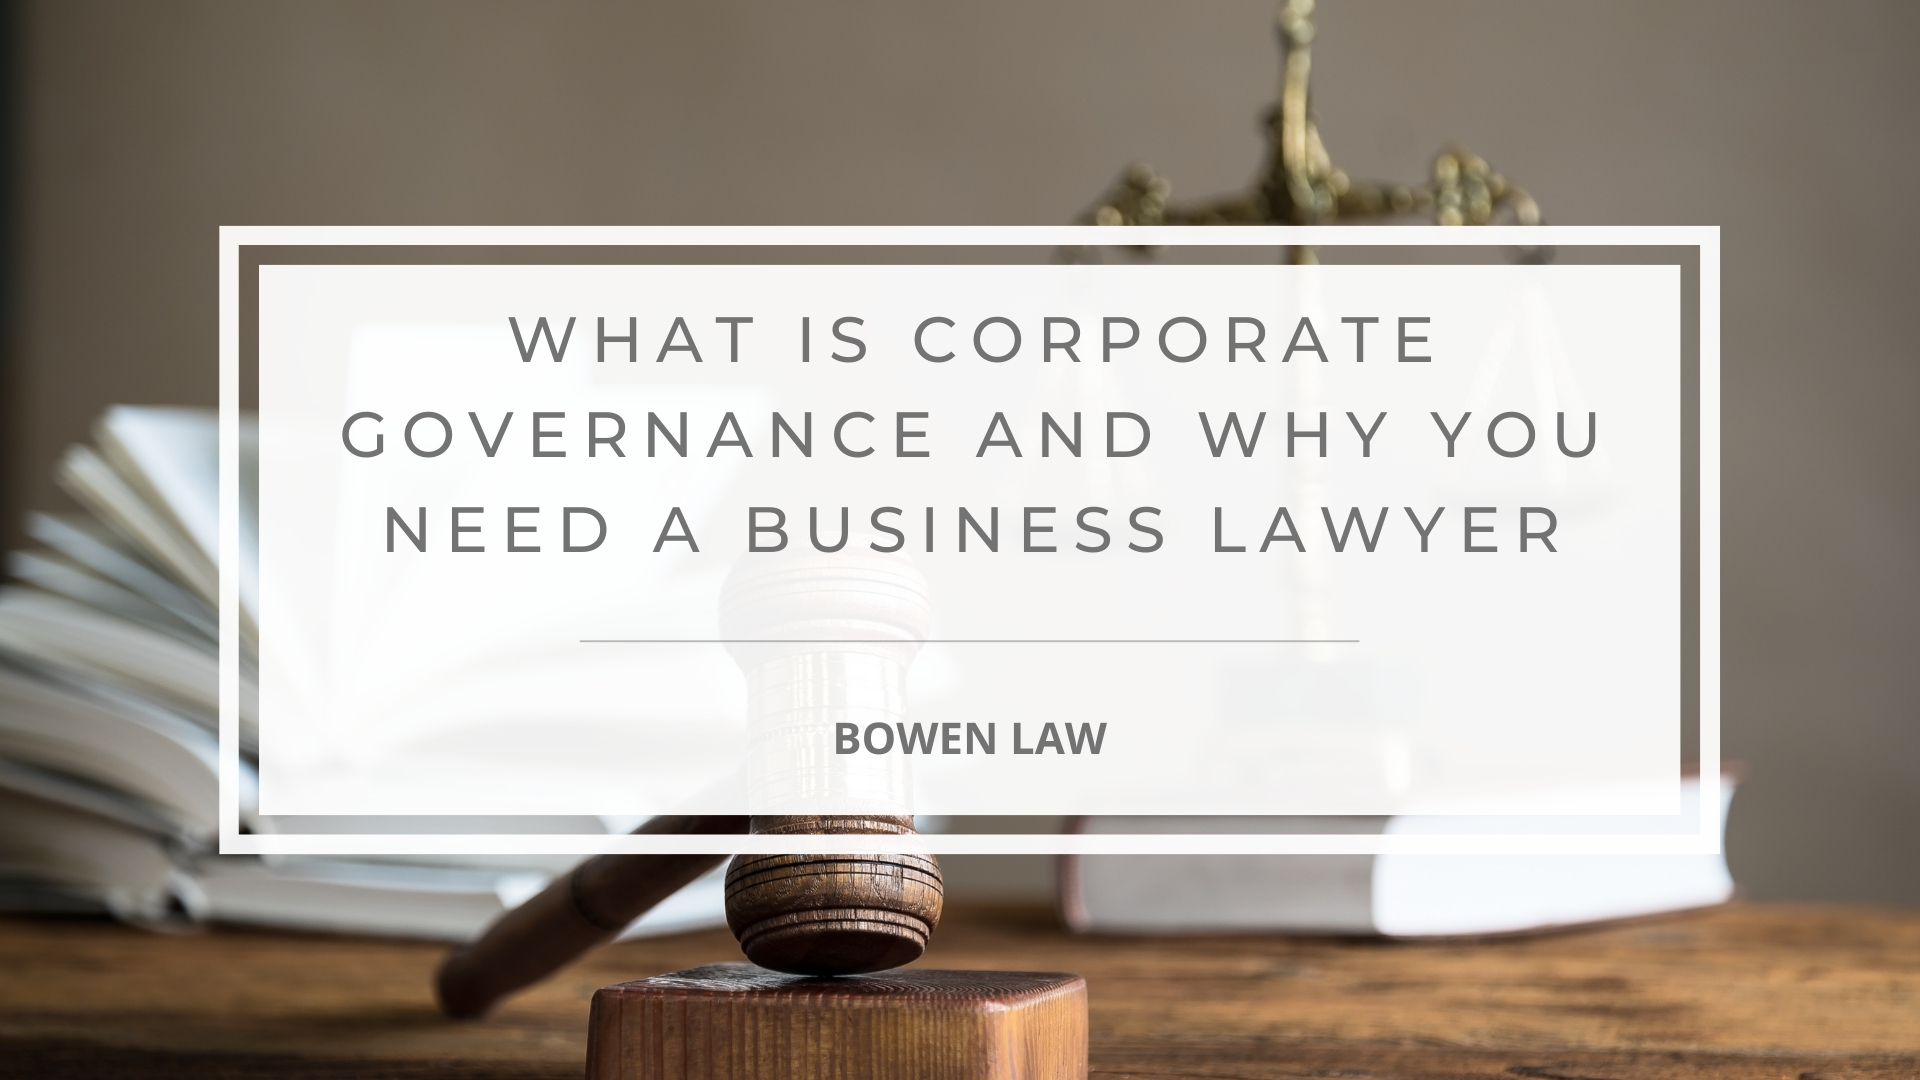 Featured image of what is corporate governance and why you need a business lawyer